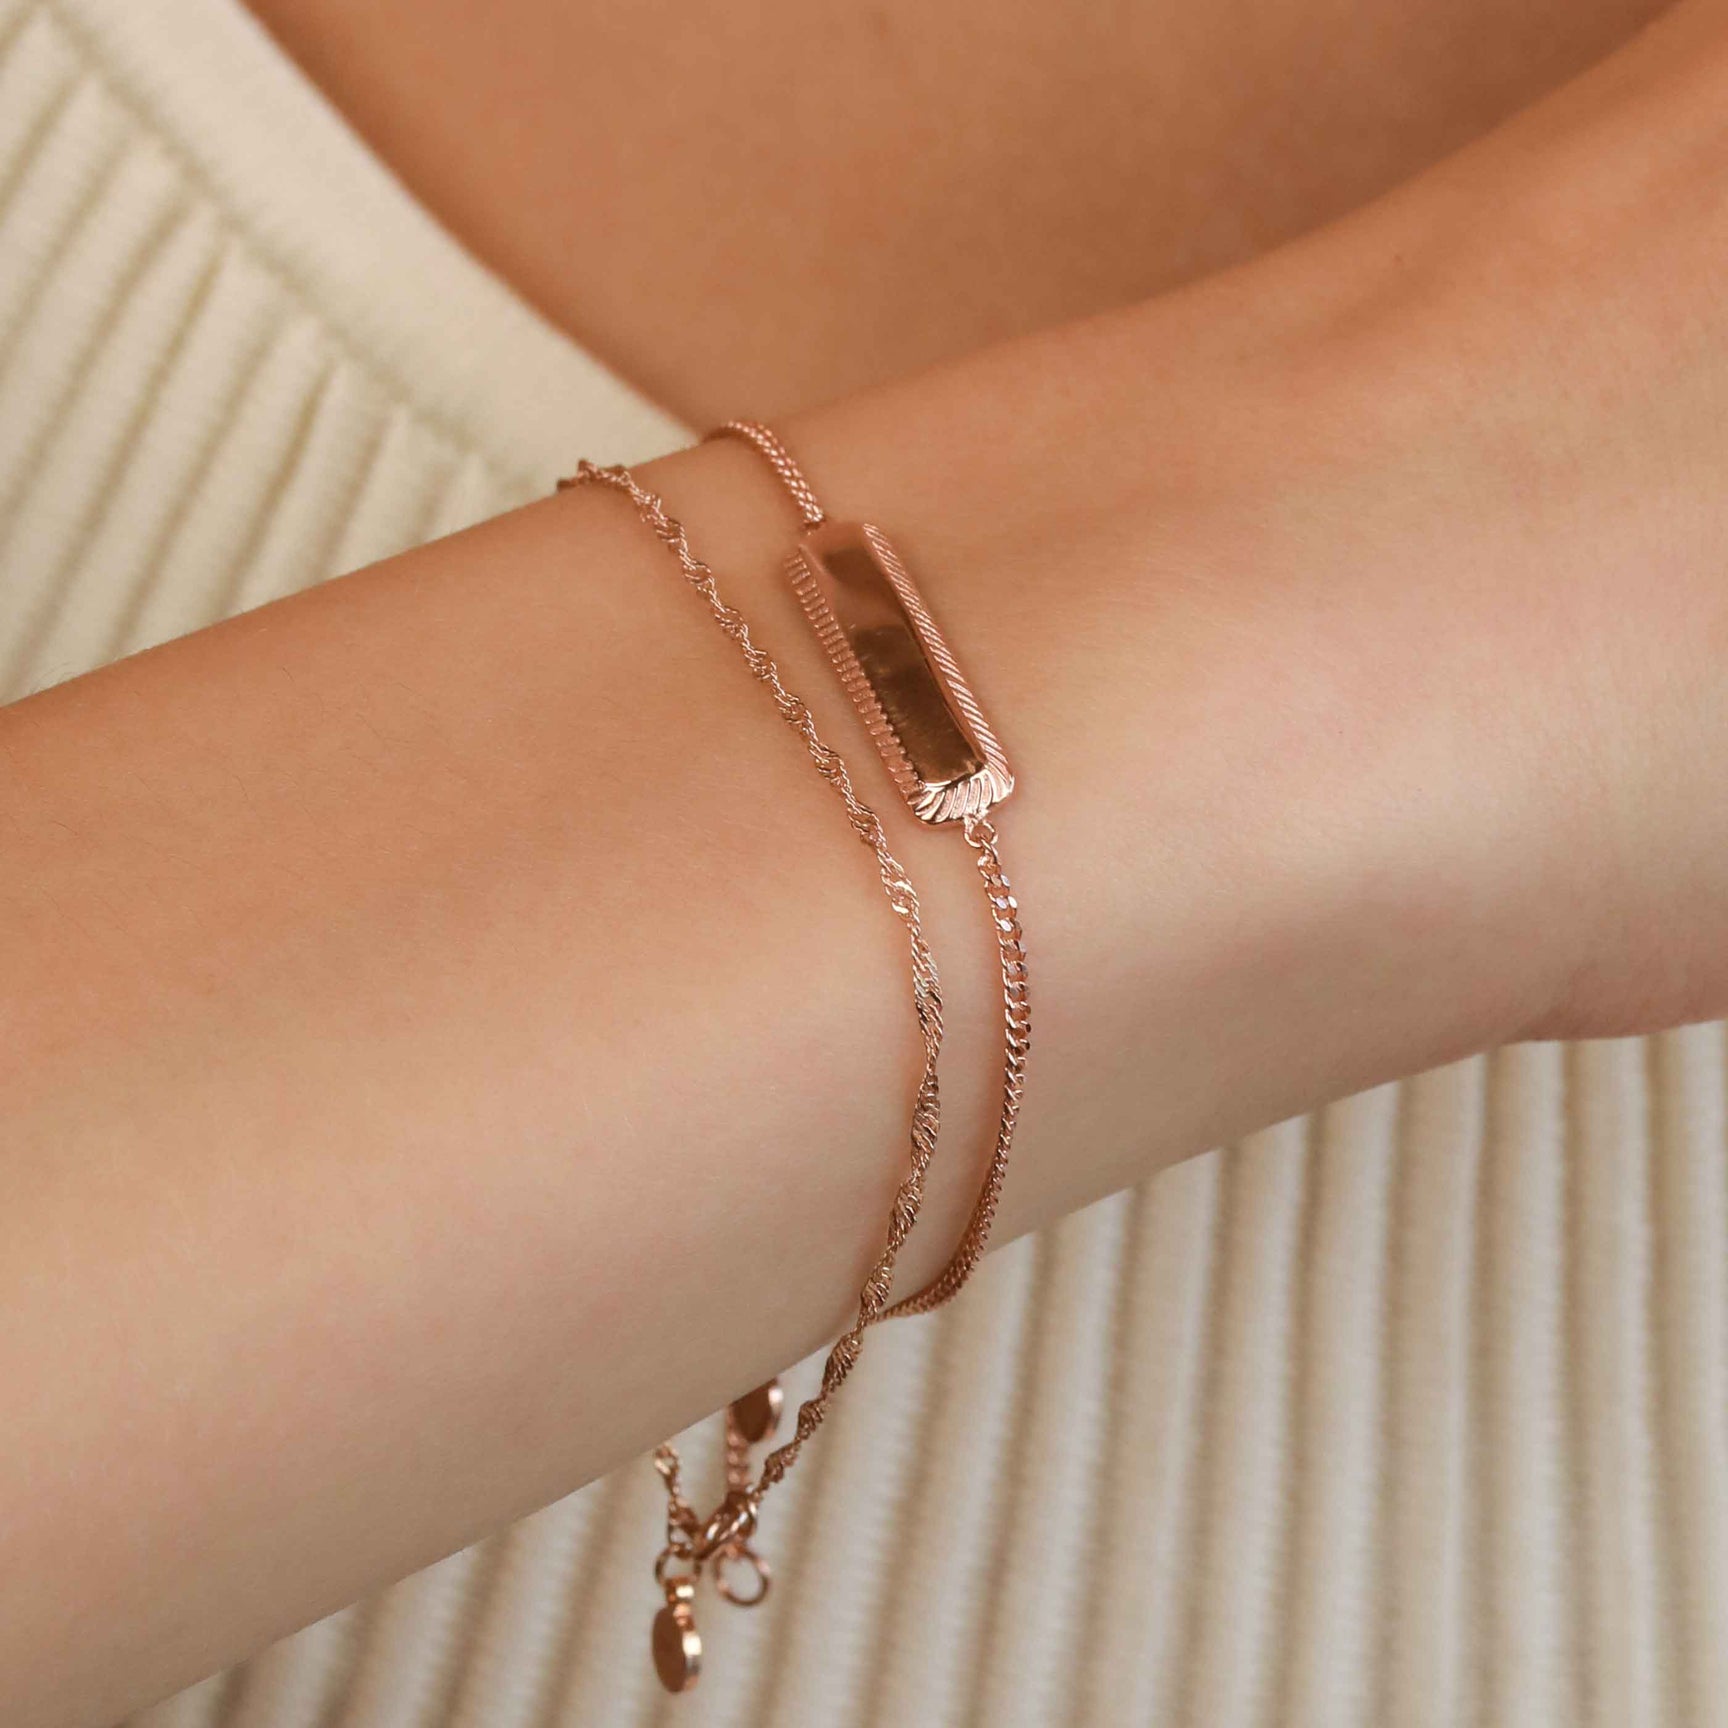 Etched ID Bracelet in Rose Gold worn